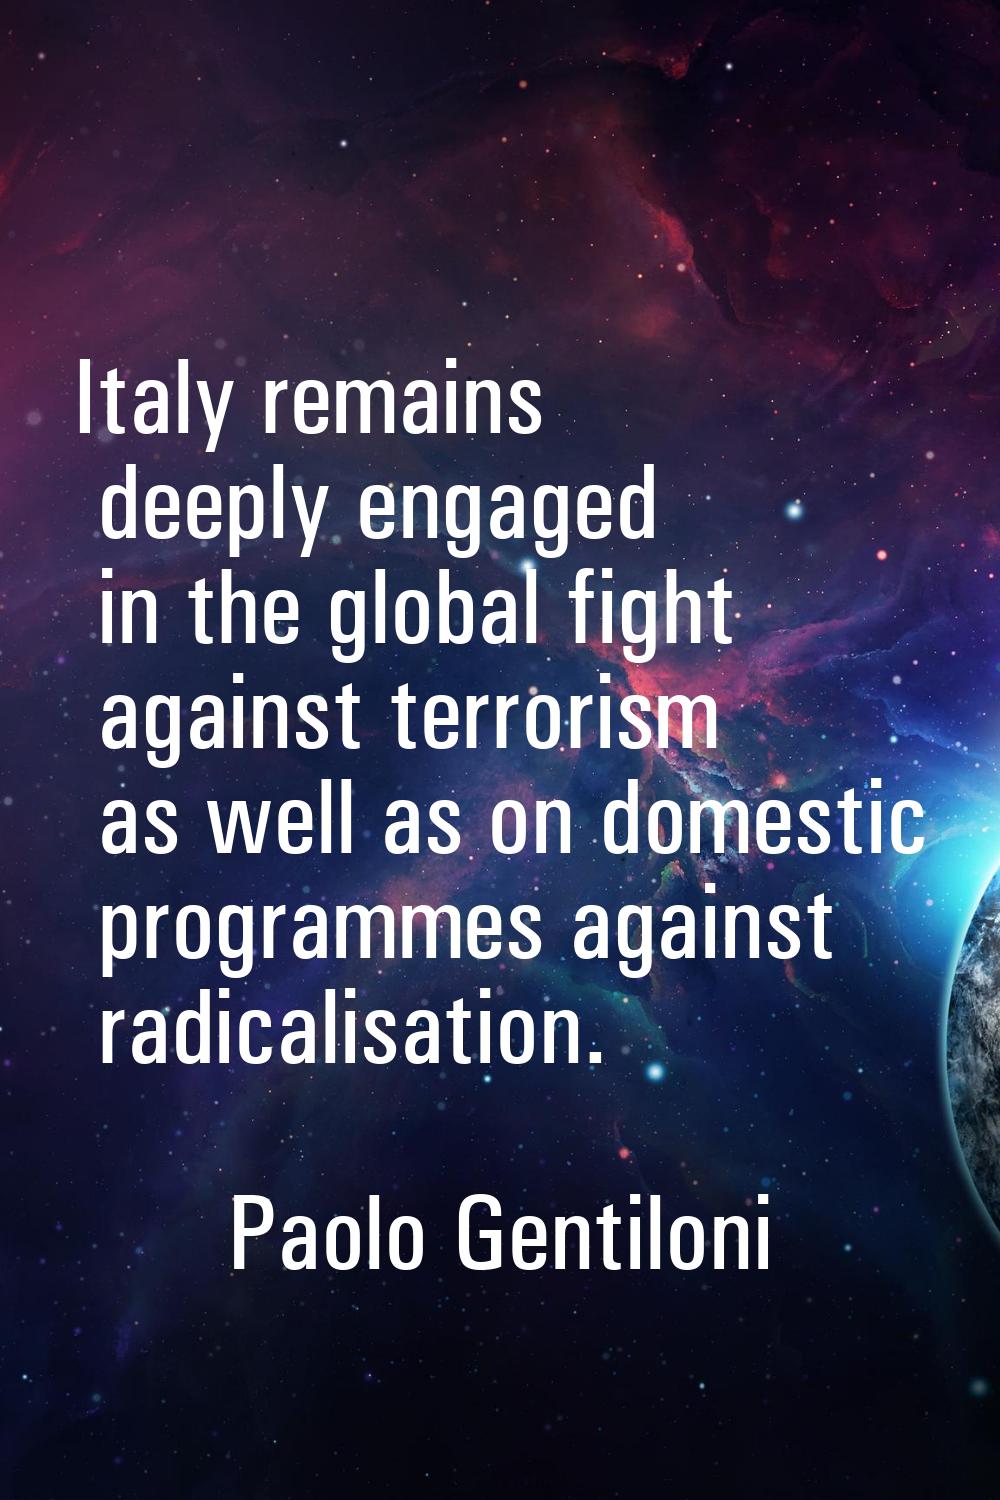 Italy remains deeply engaged in the global fight against terrorism as well as on domestic programme